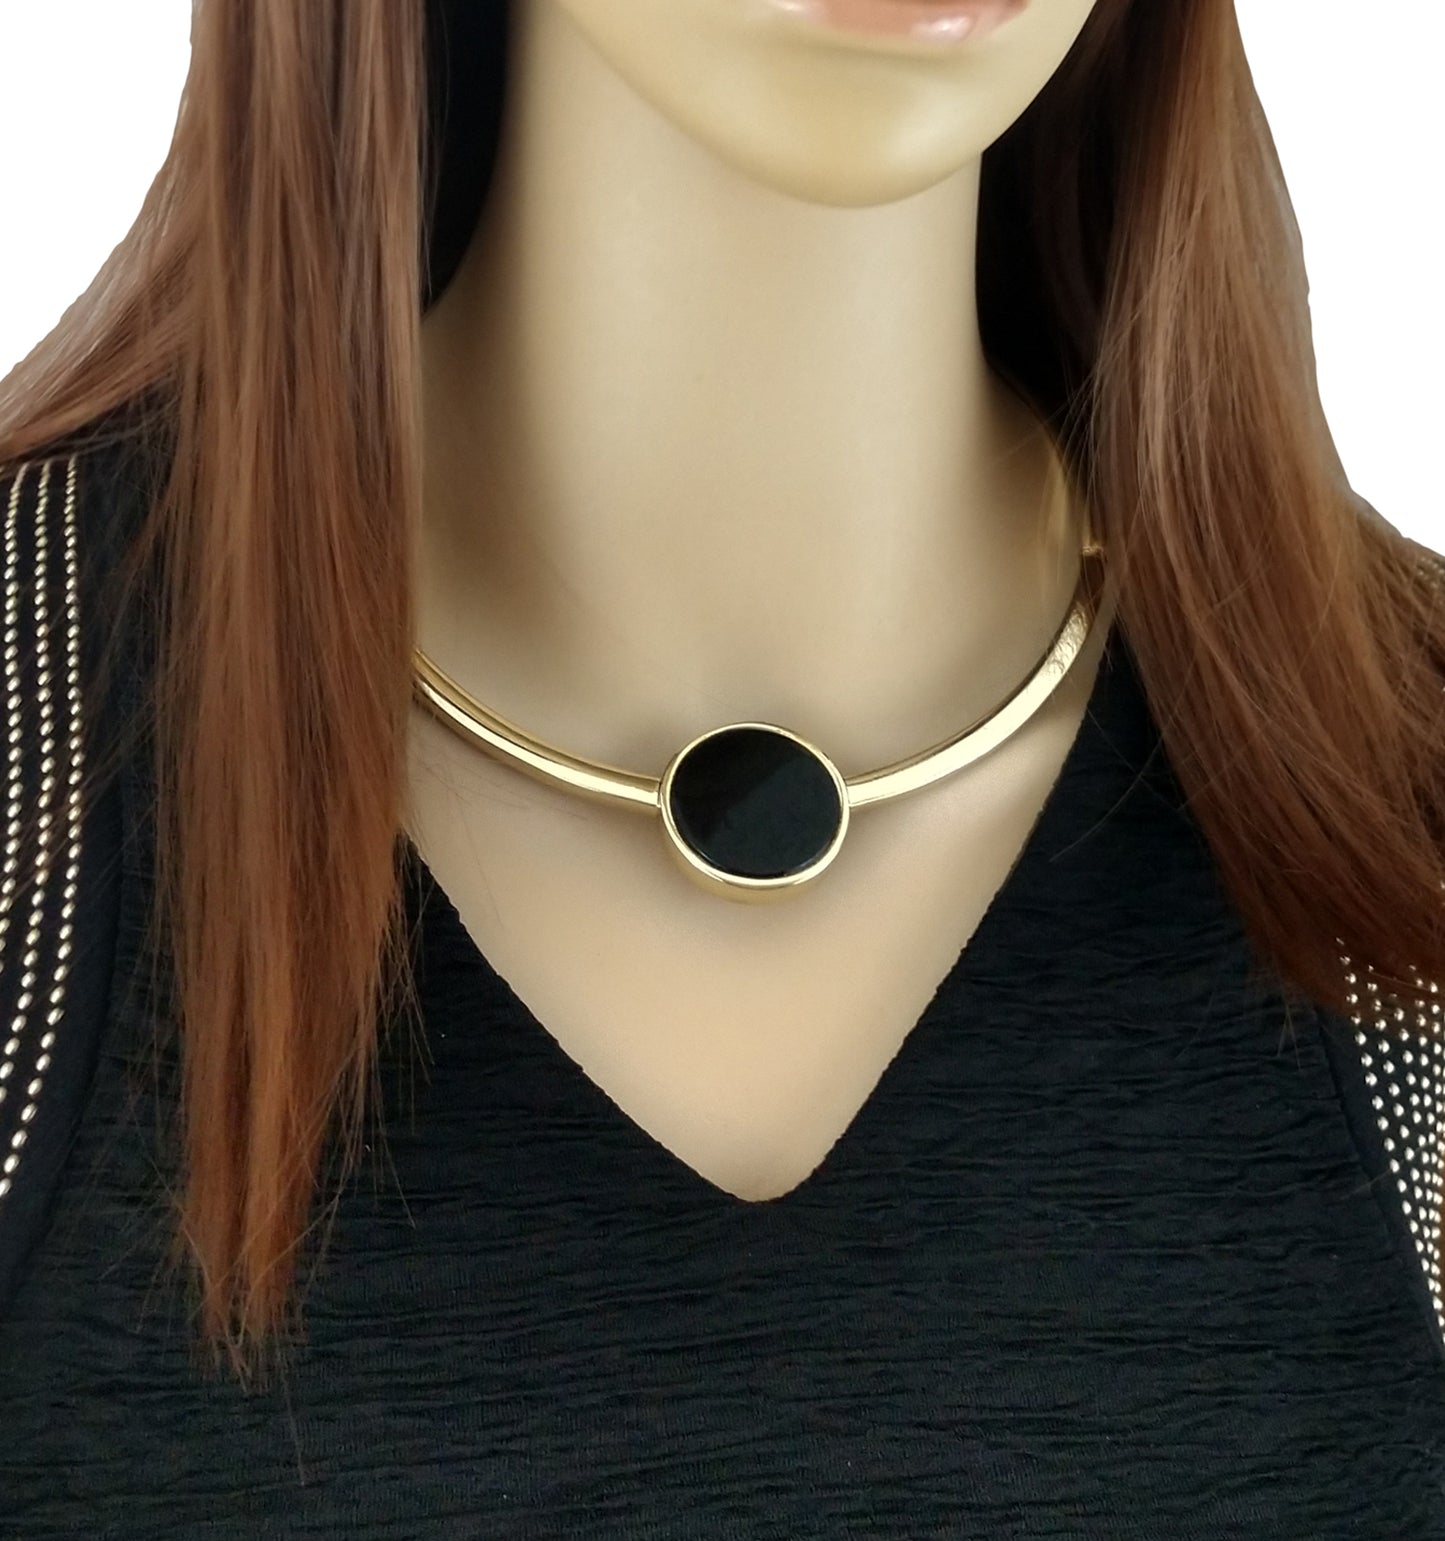 Chicos Black Stone Gold Tone Statement Collar Necklace 16-20" NWOT